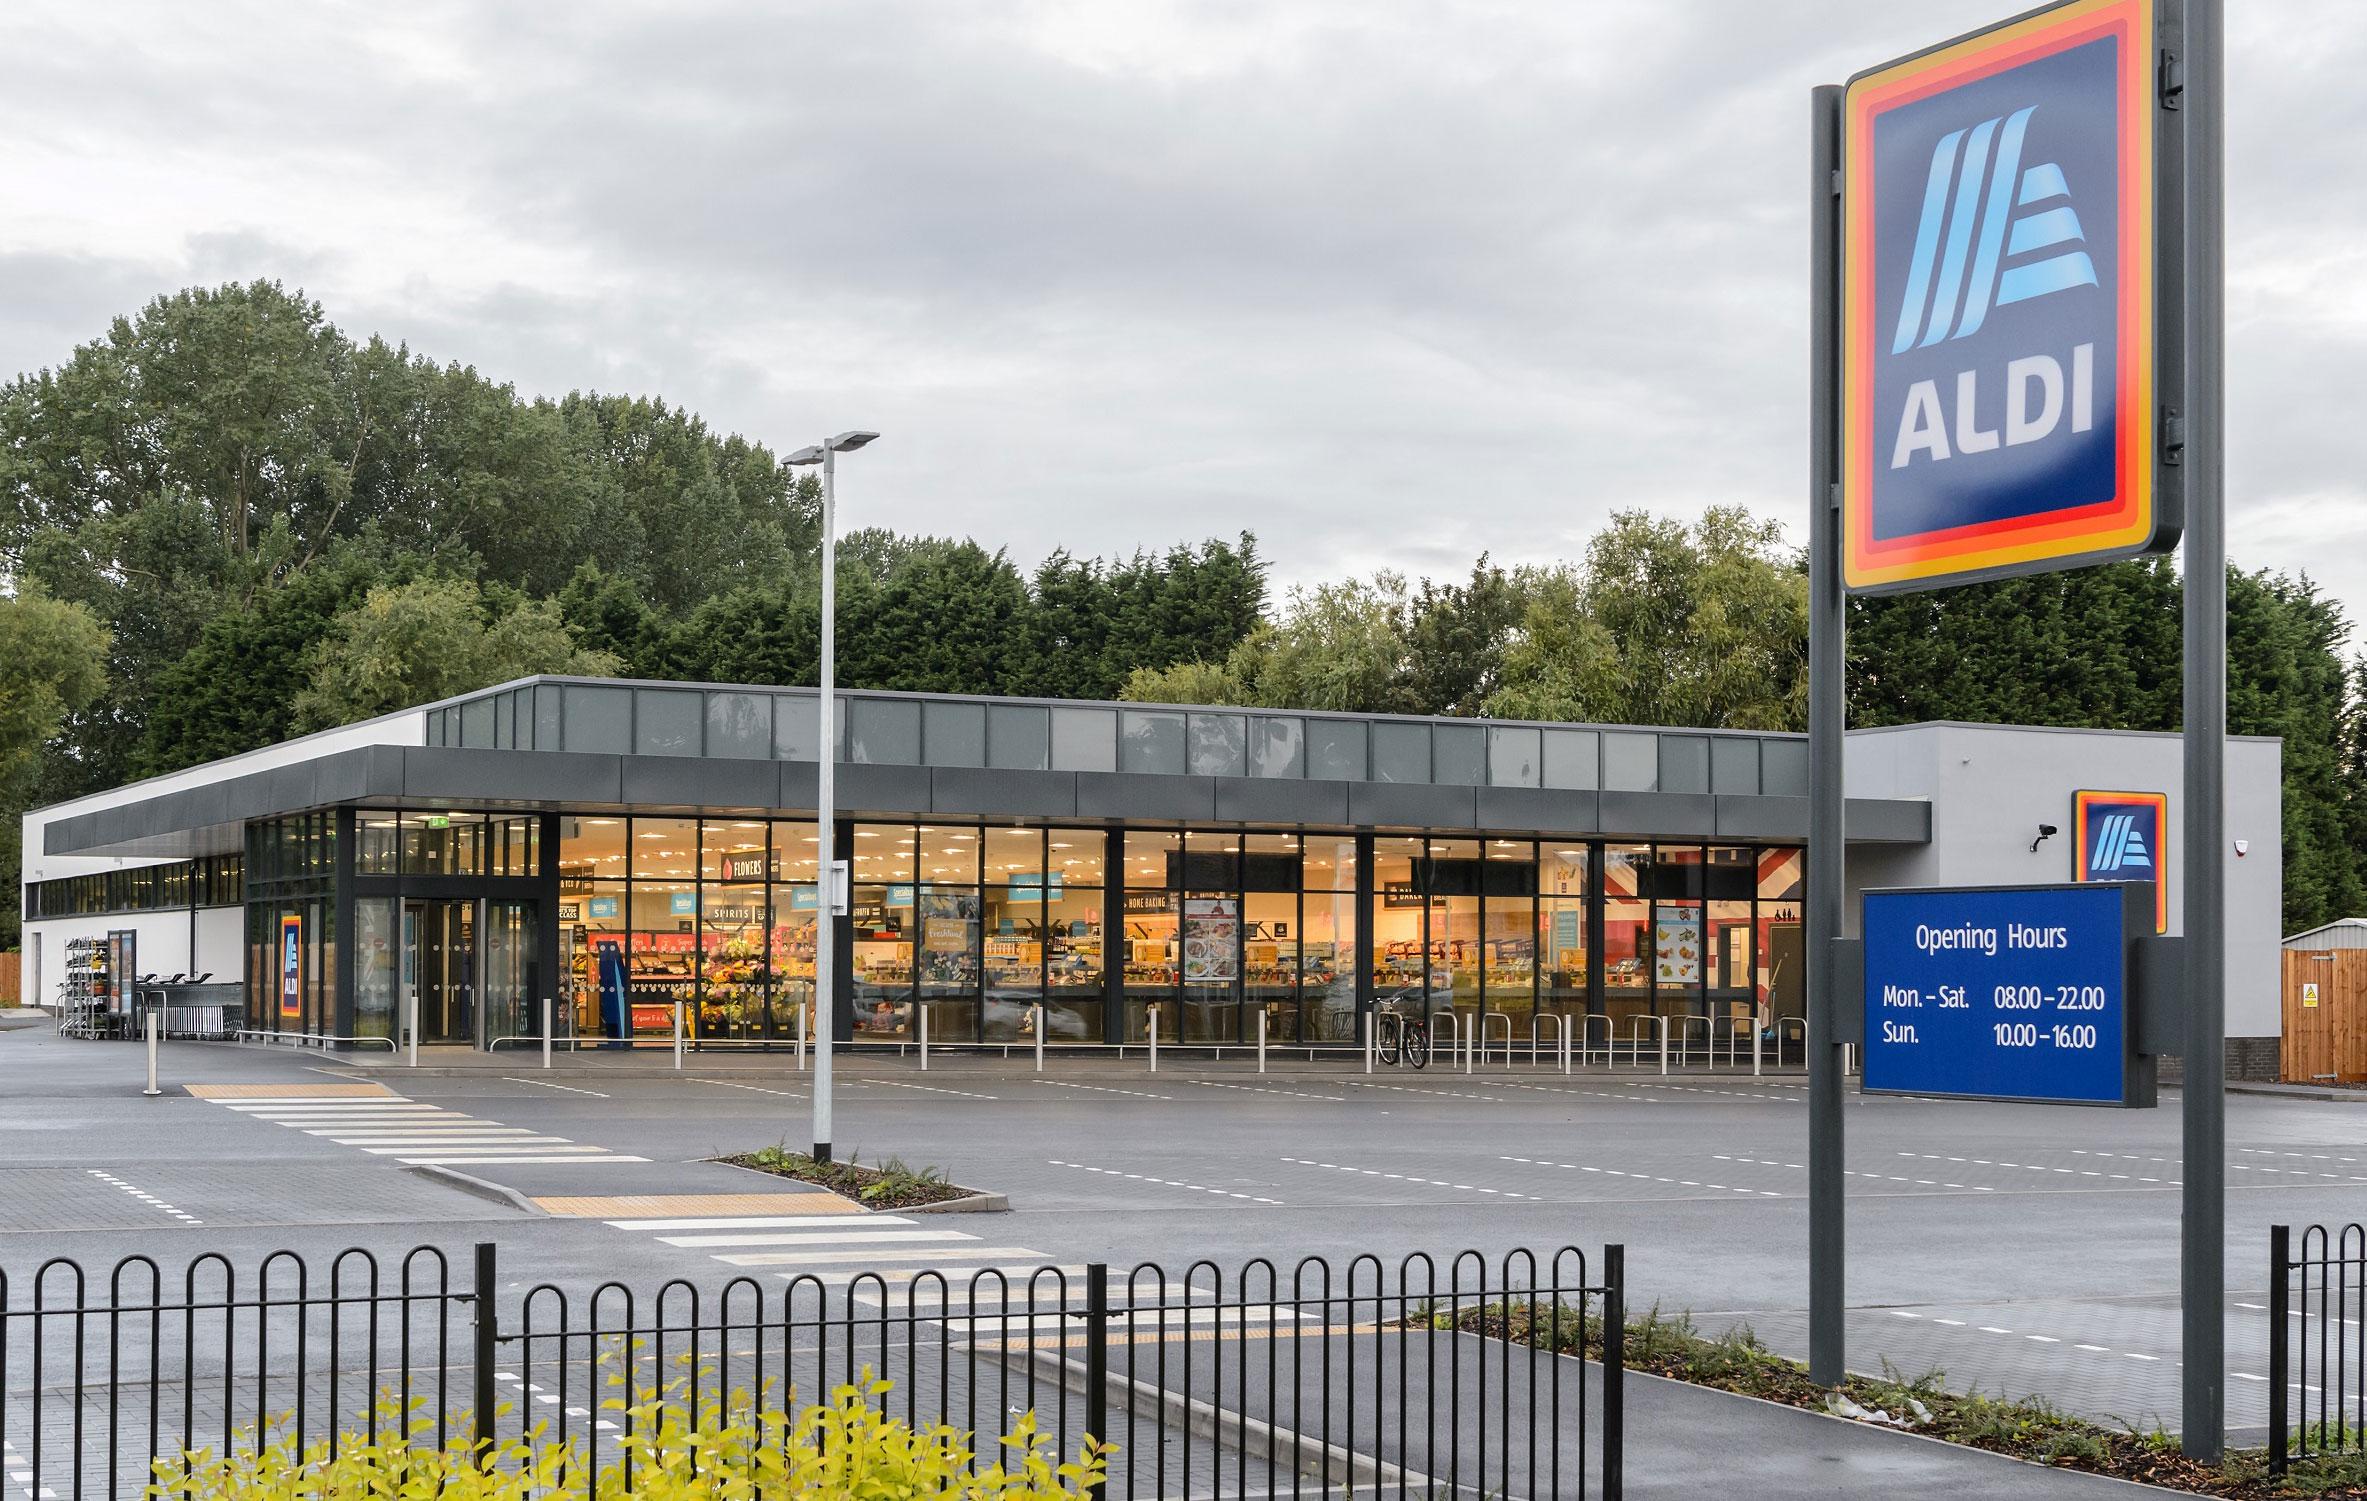 In 2017, Aldi enjoyed its most successful year in the UK and Ireland ever